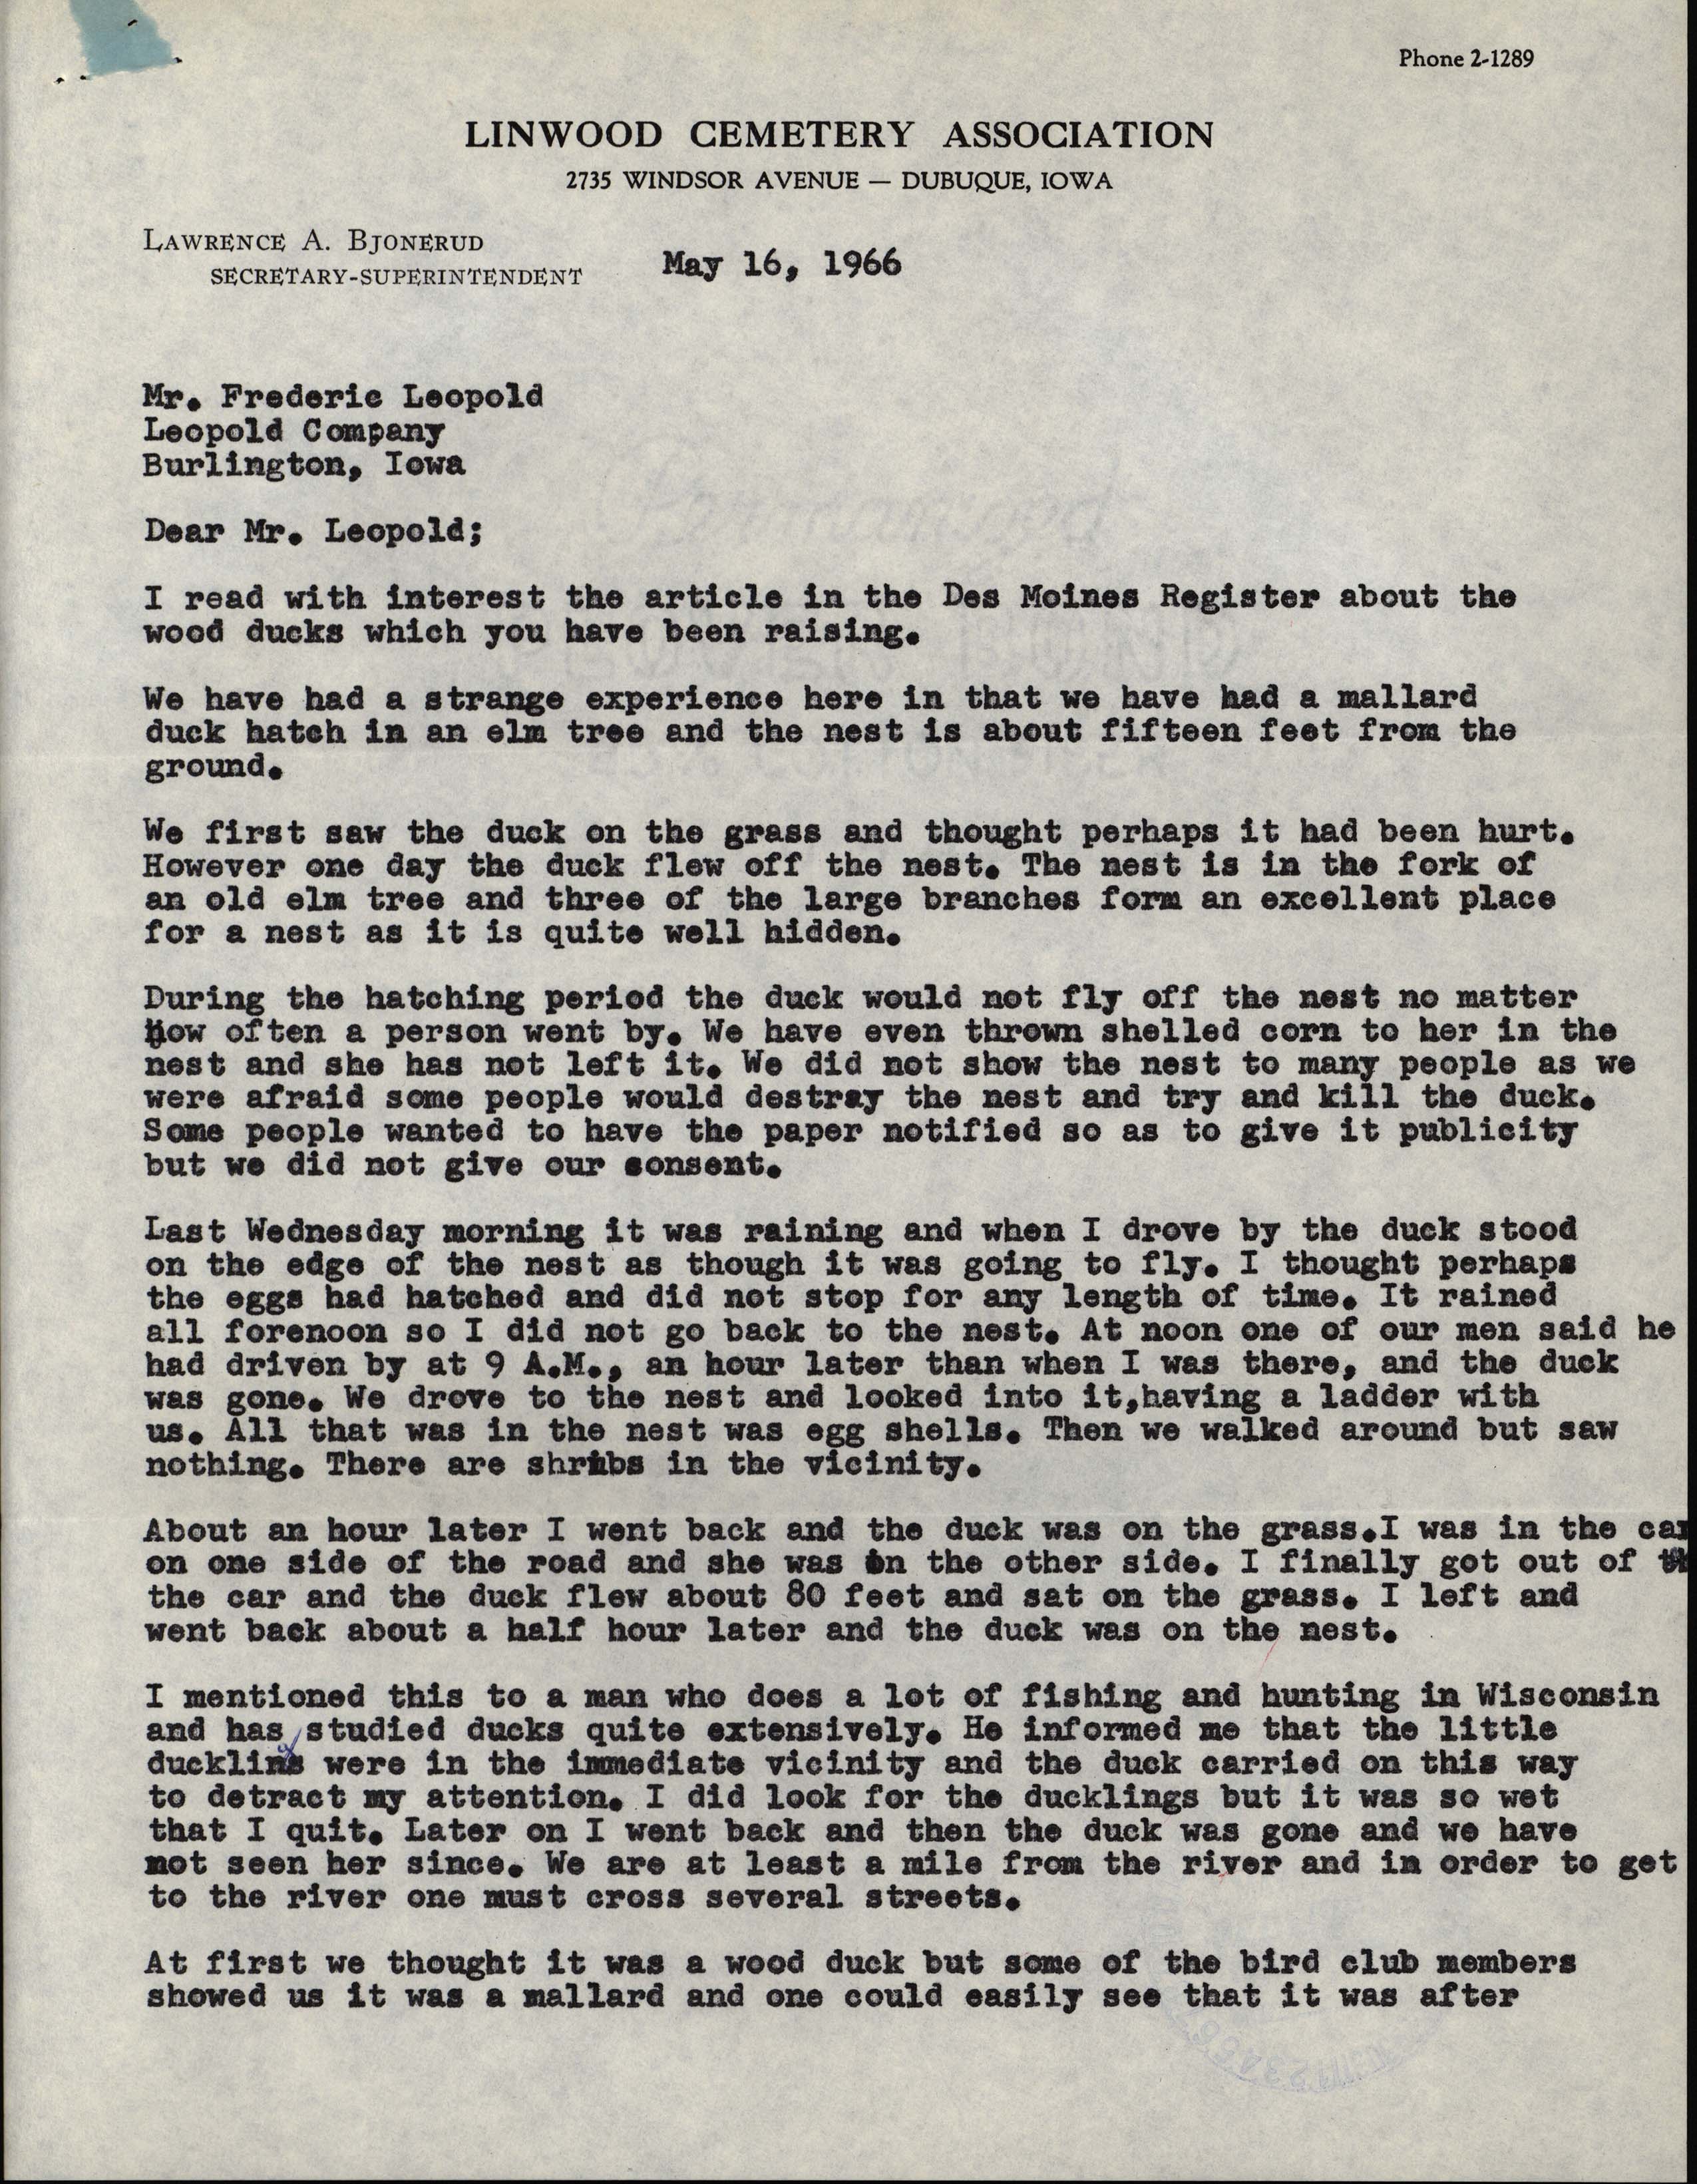 Lawrence A. Bjonerud letter to Frederic Leopold regarding a Mallard nest and identifying Wood Ducks, May 16, 1966